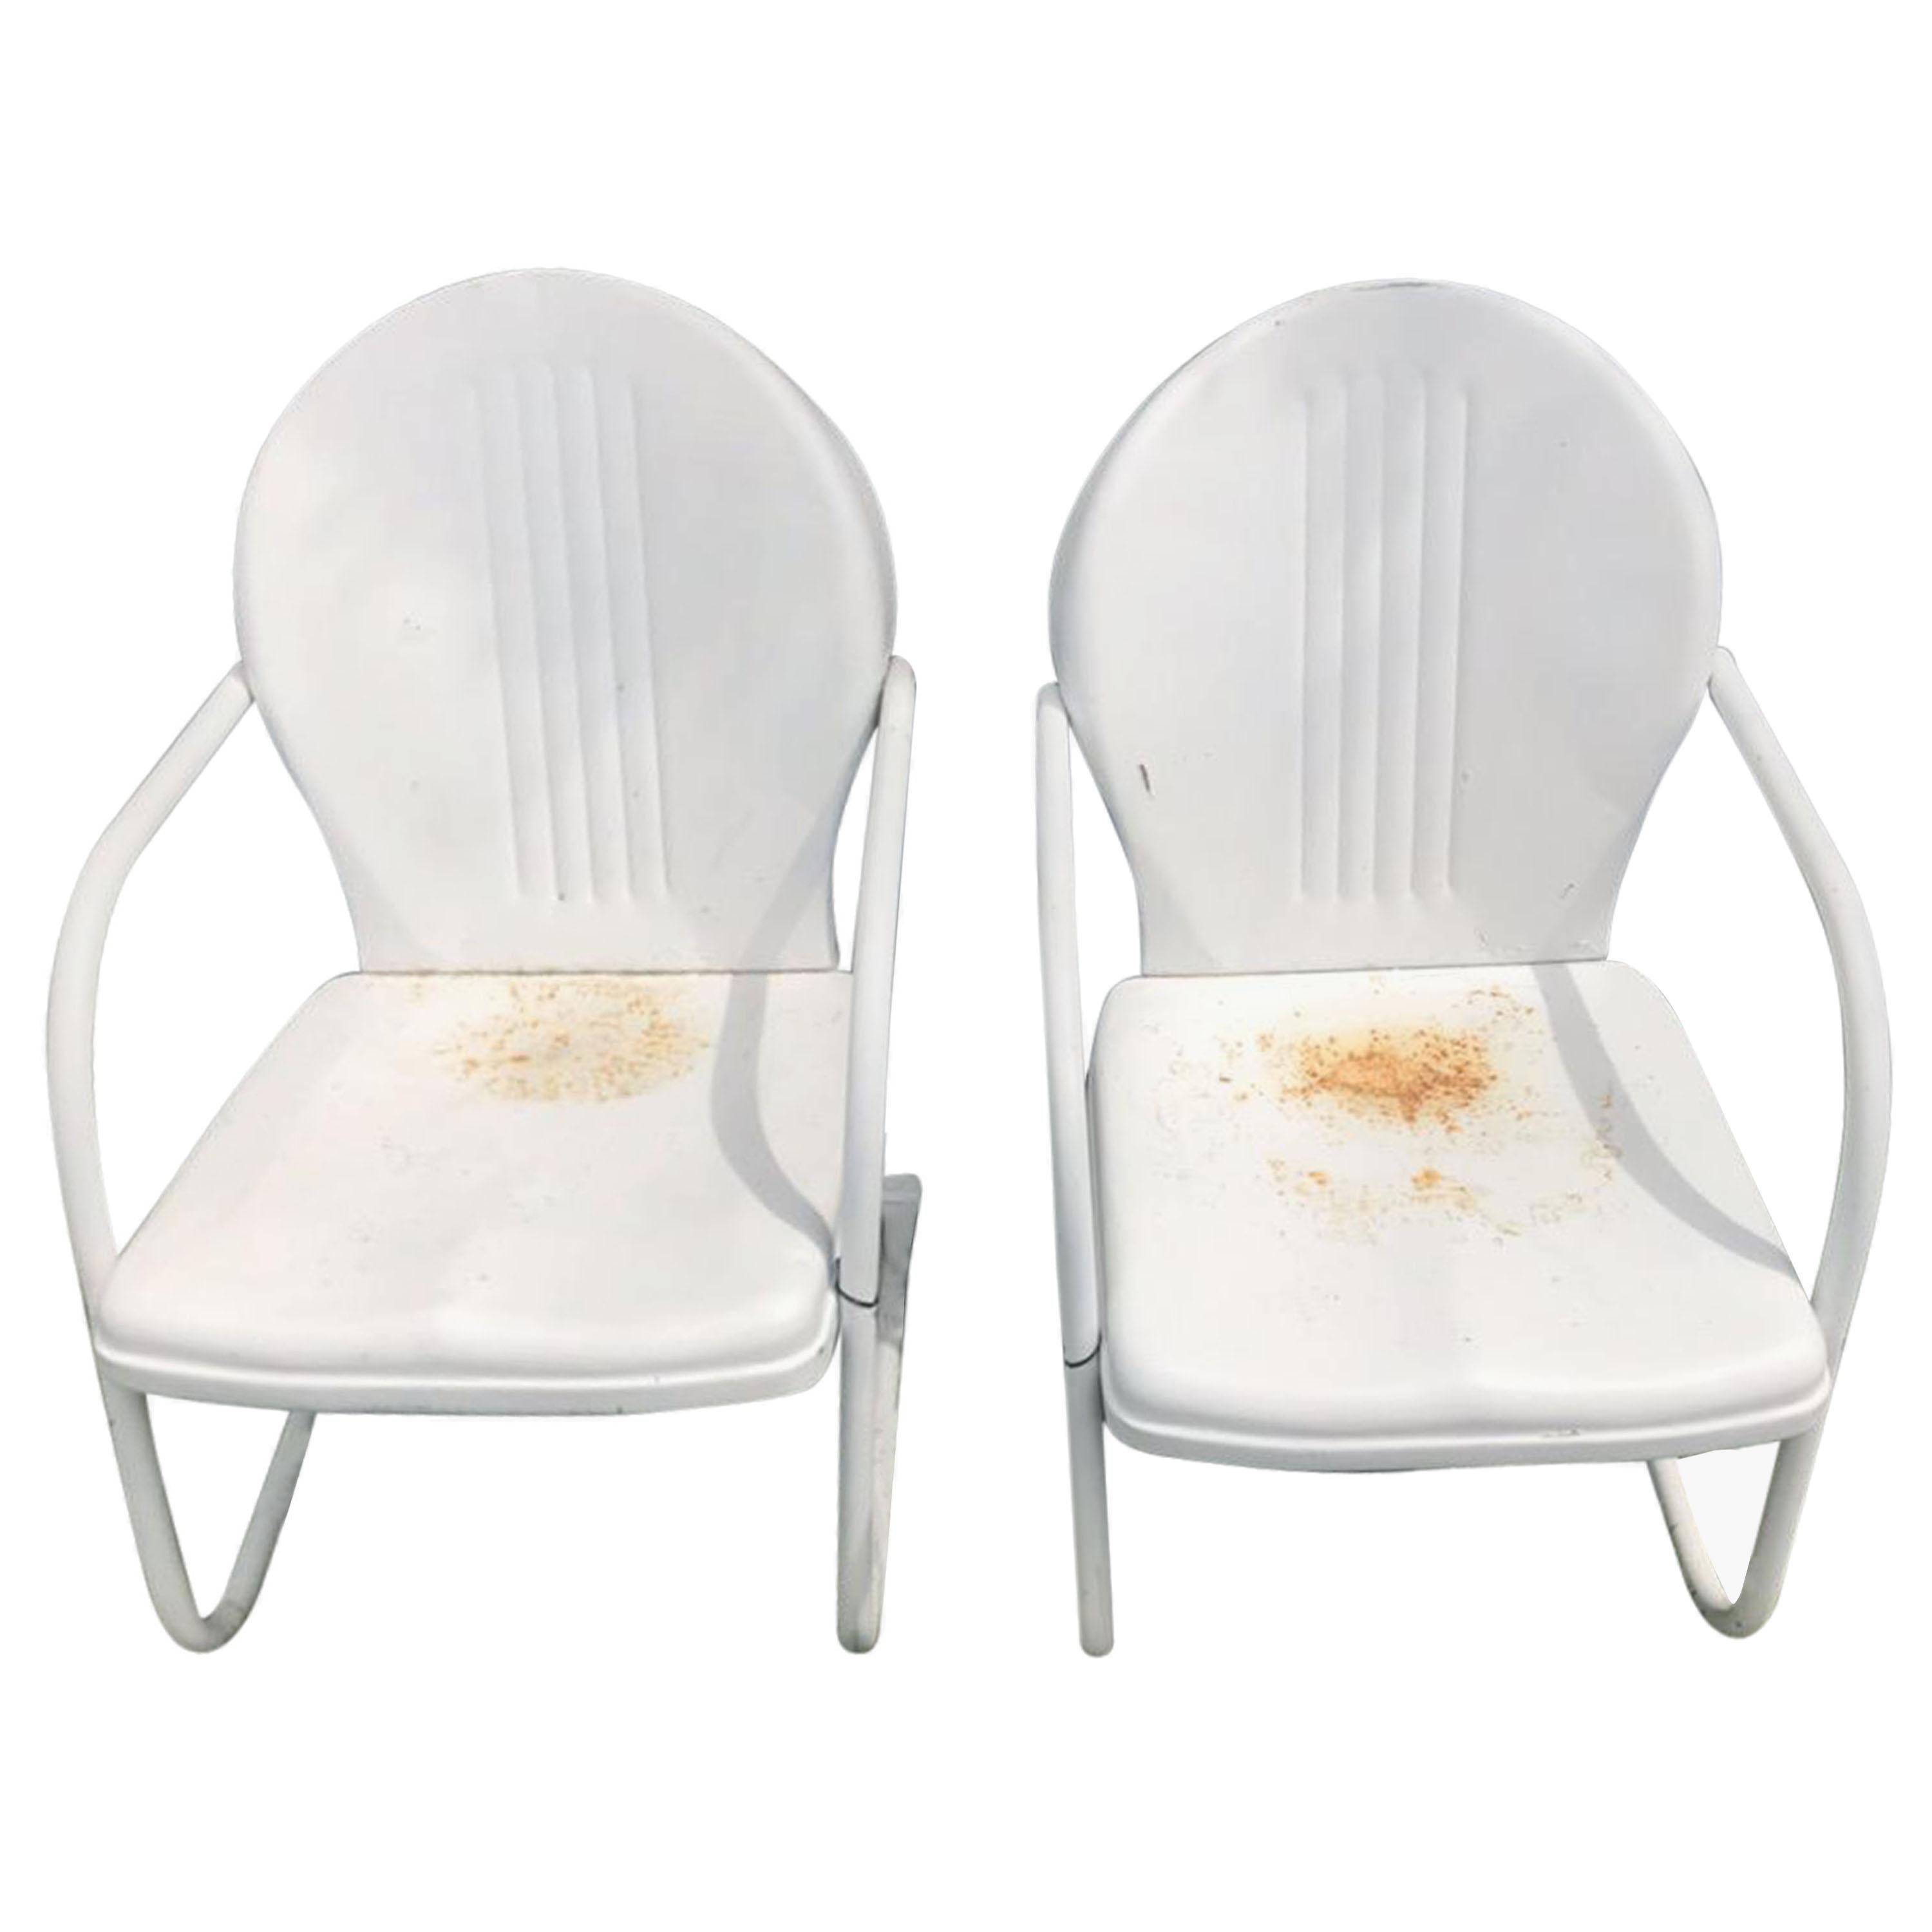 Midcentury Out Door Chairs in Old White Paint, Pair